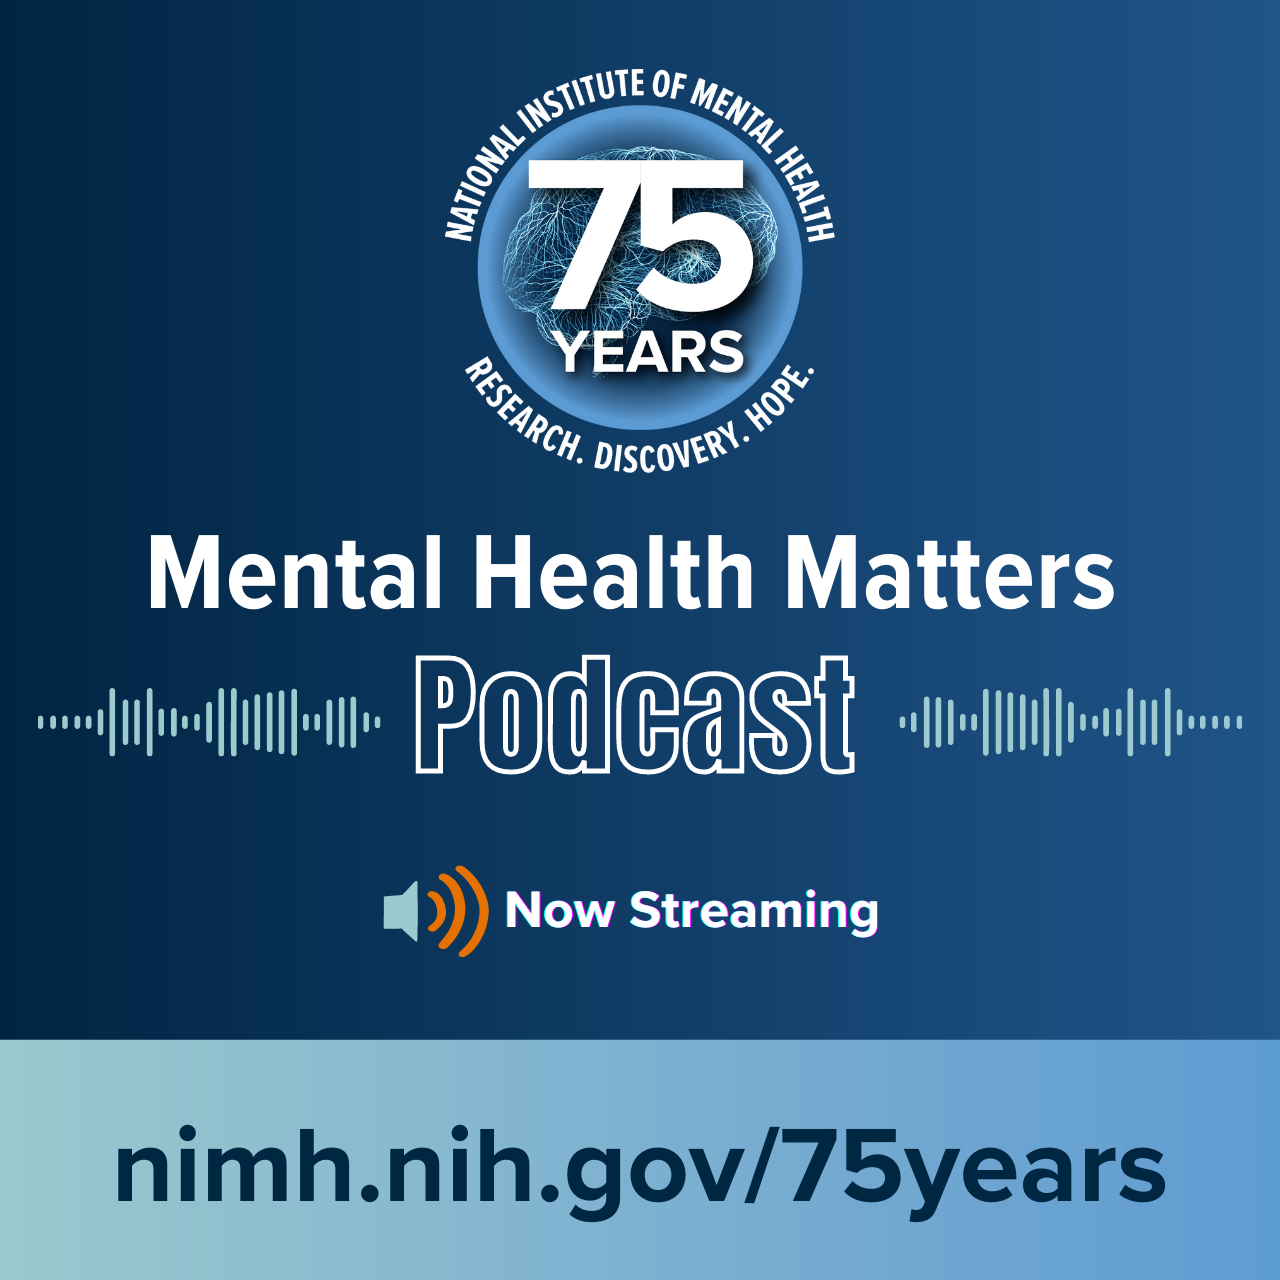 NATIONAL INSTITUTE OF MENTAL HEALTH 75 YEARS RESEARCH. DISCOVERY. HOPE. Mental Health Matters Podcast Now Streaming Points to nimh.nih.gov/75years